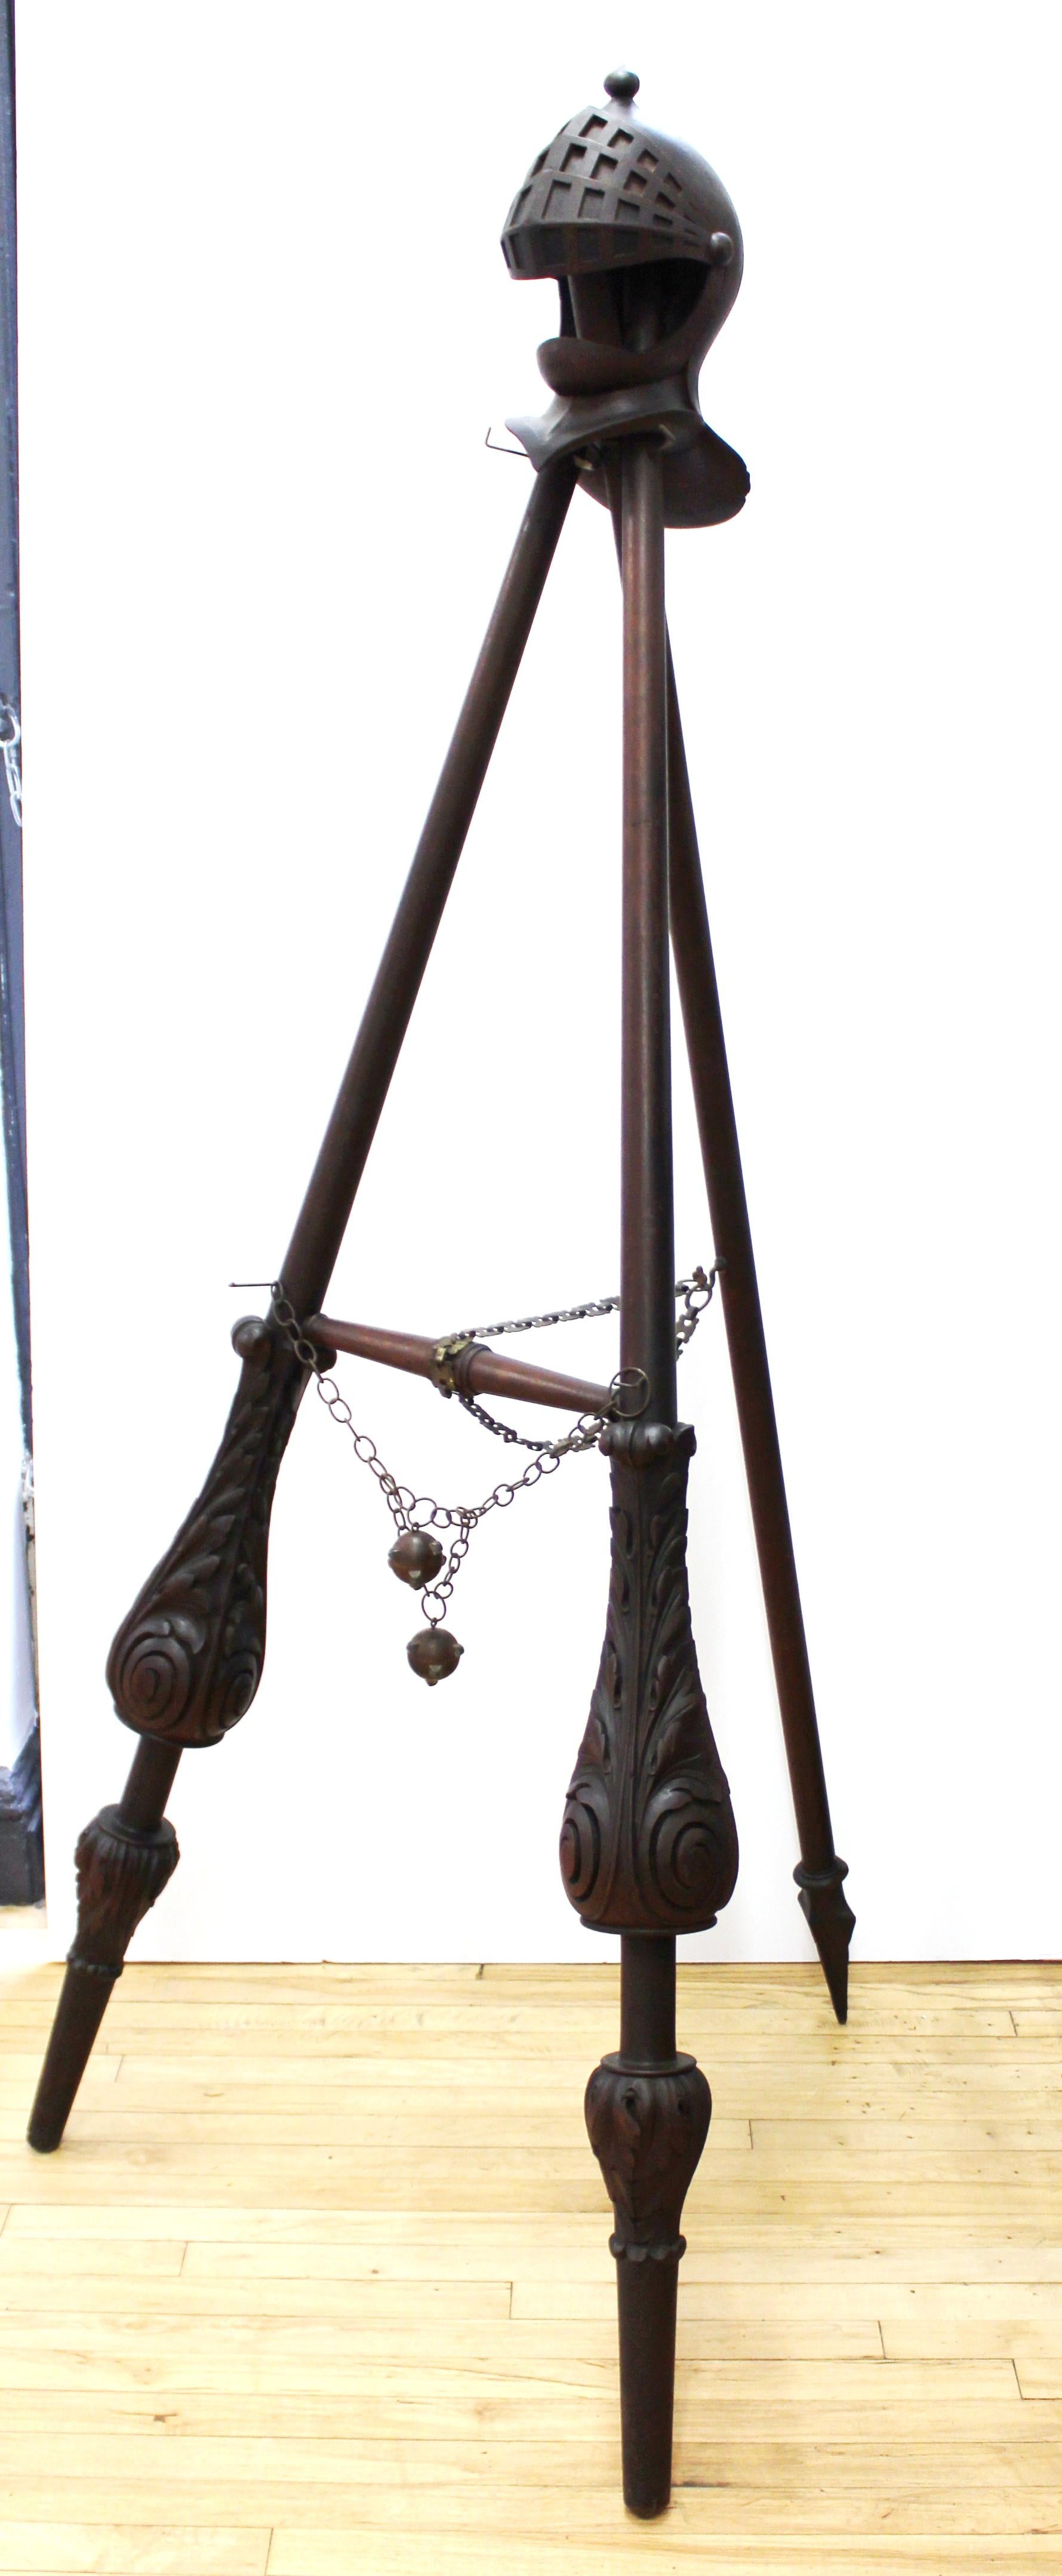 Italian Renaissance Revival monumental easel in hand carved mahogany wood, with jousting lances forming the legs and a large knight helmet finial. The two frontal jousting lance legs have elaborately carved ornamental acanthus leave foliage.